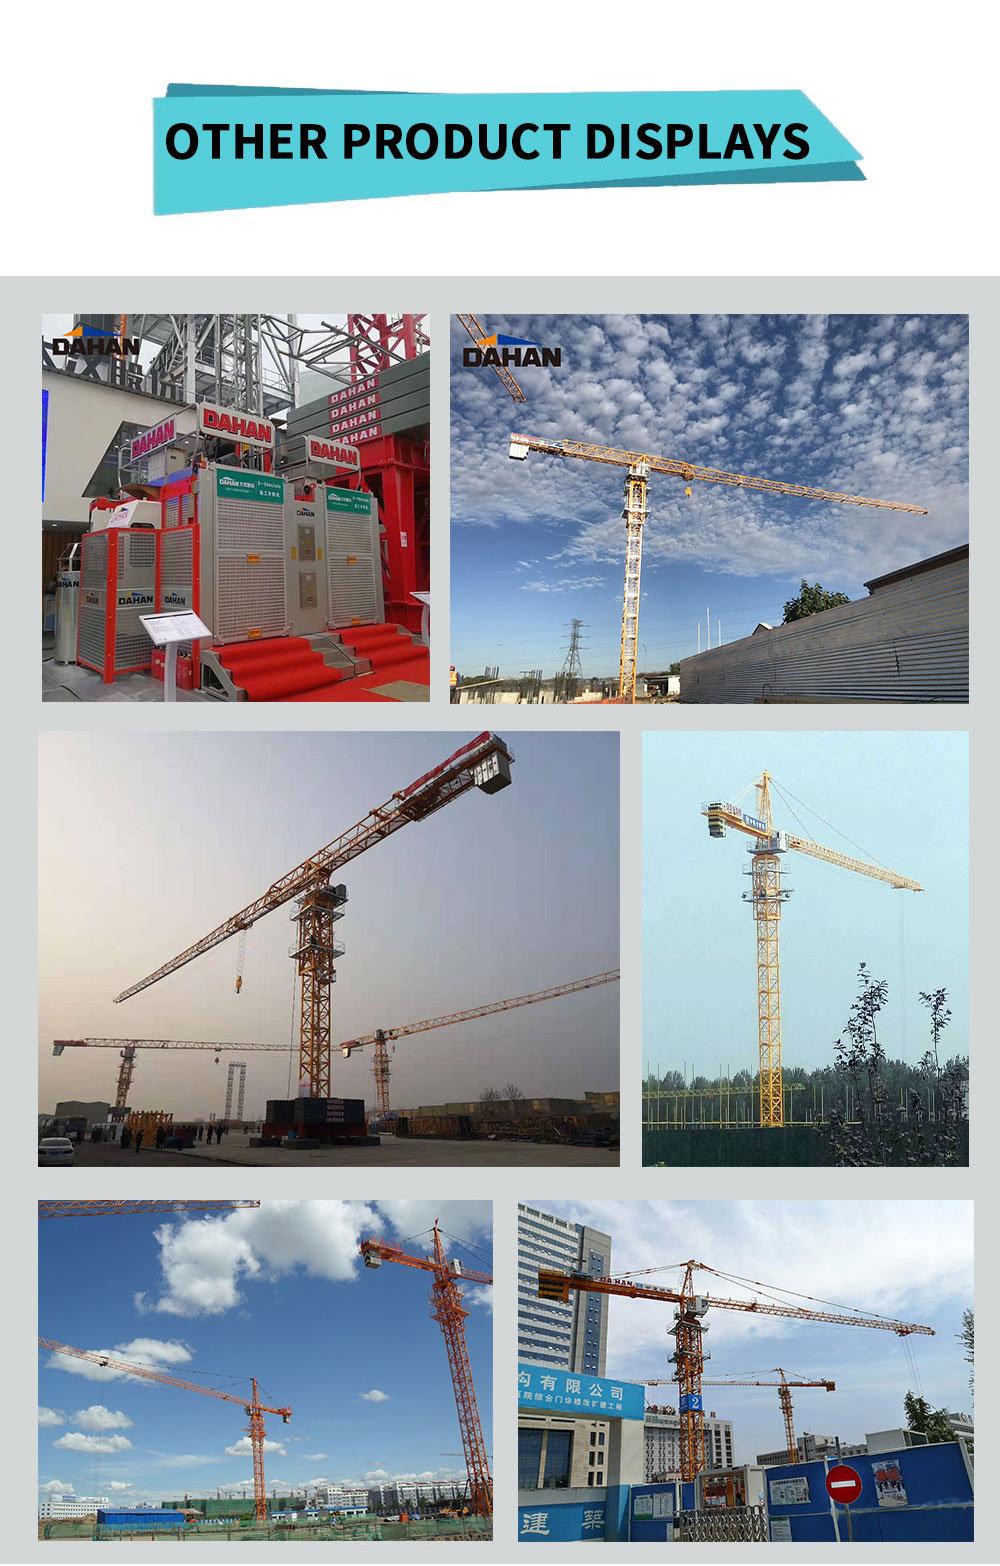 Hot-Selling 16 Ton Tower Cap Tower Crane Widely Used in Construction Sites